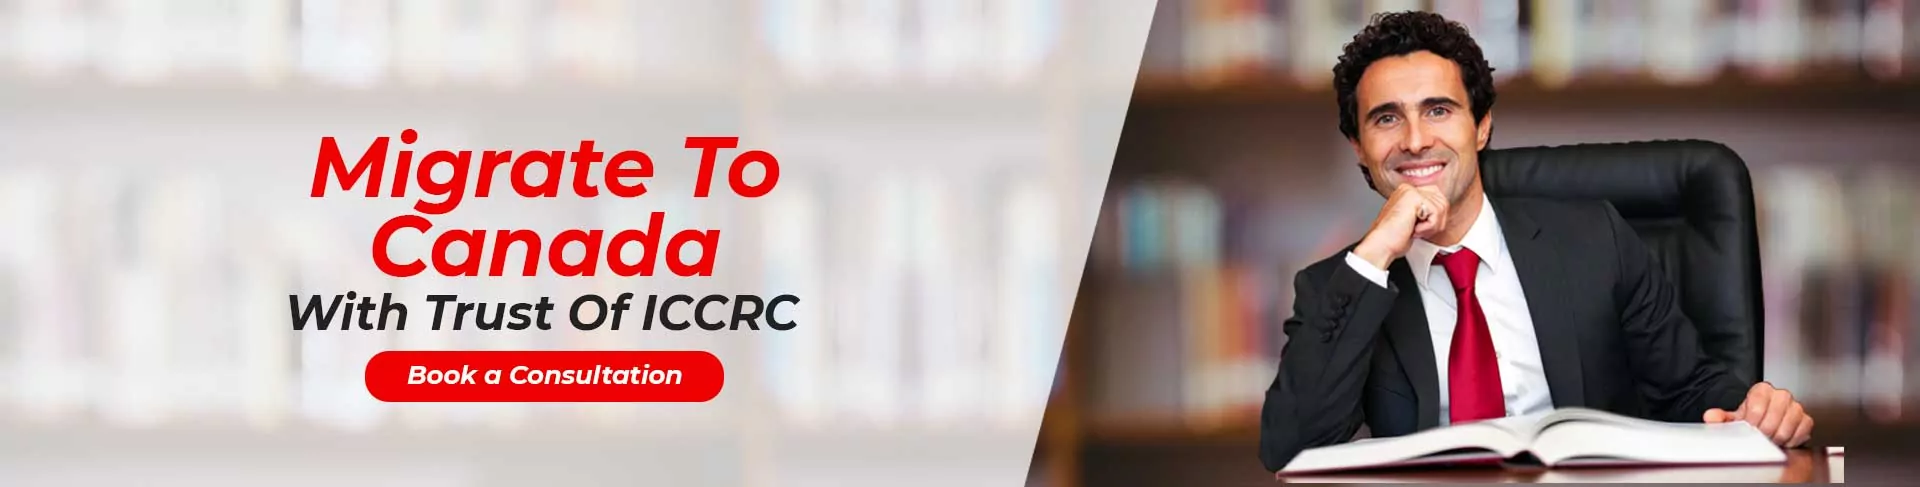 Migrate to Canada with trust of ICCRC